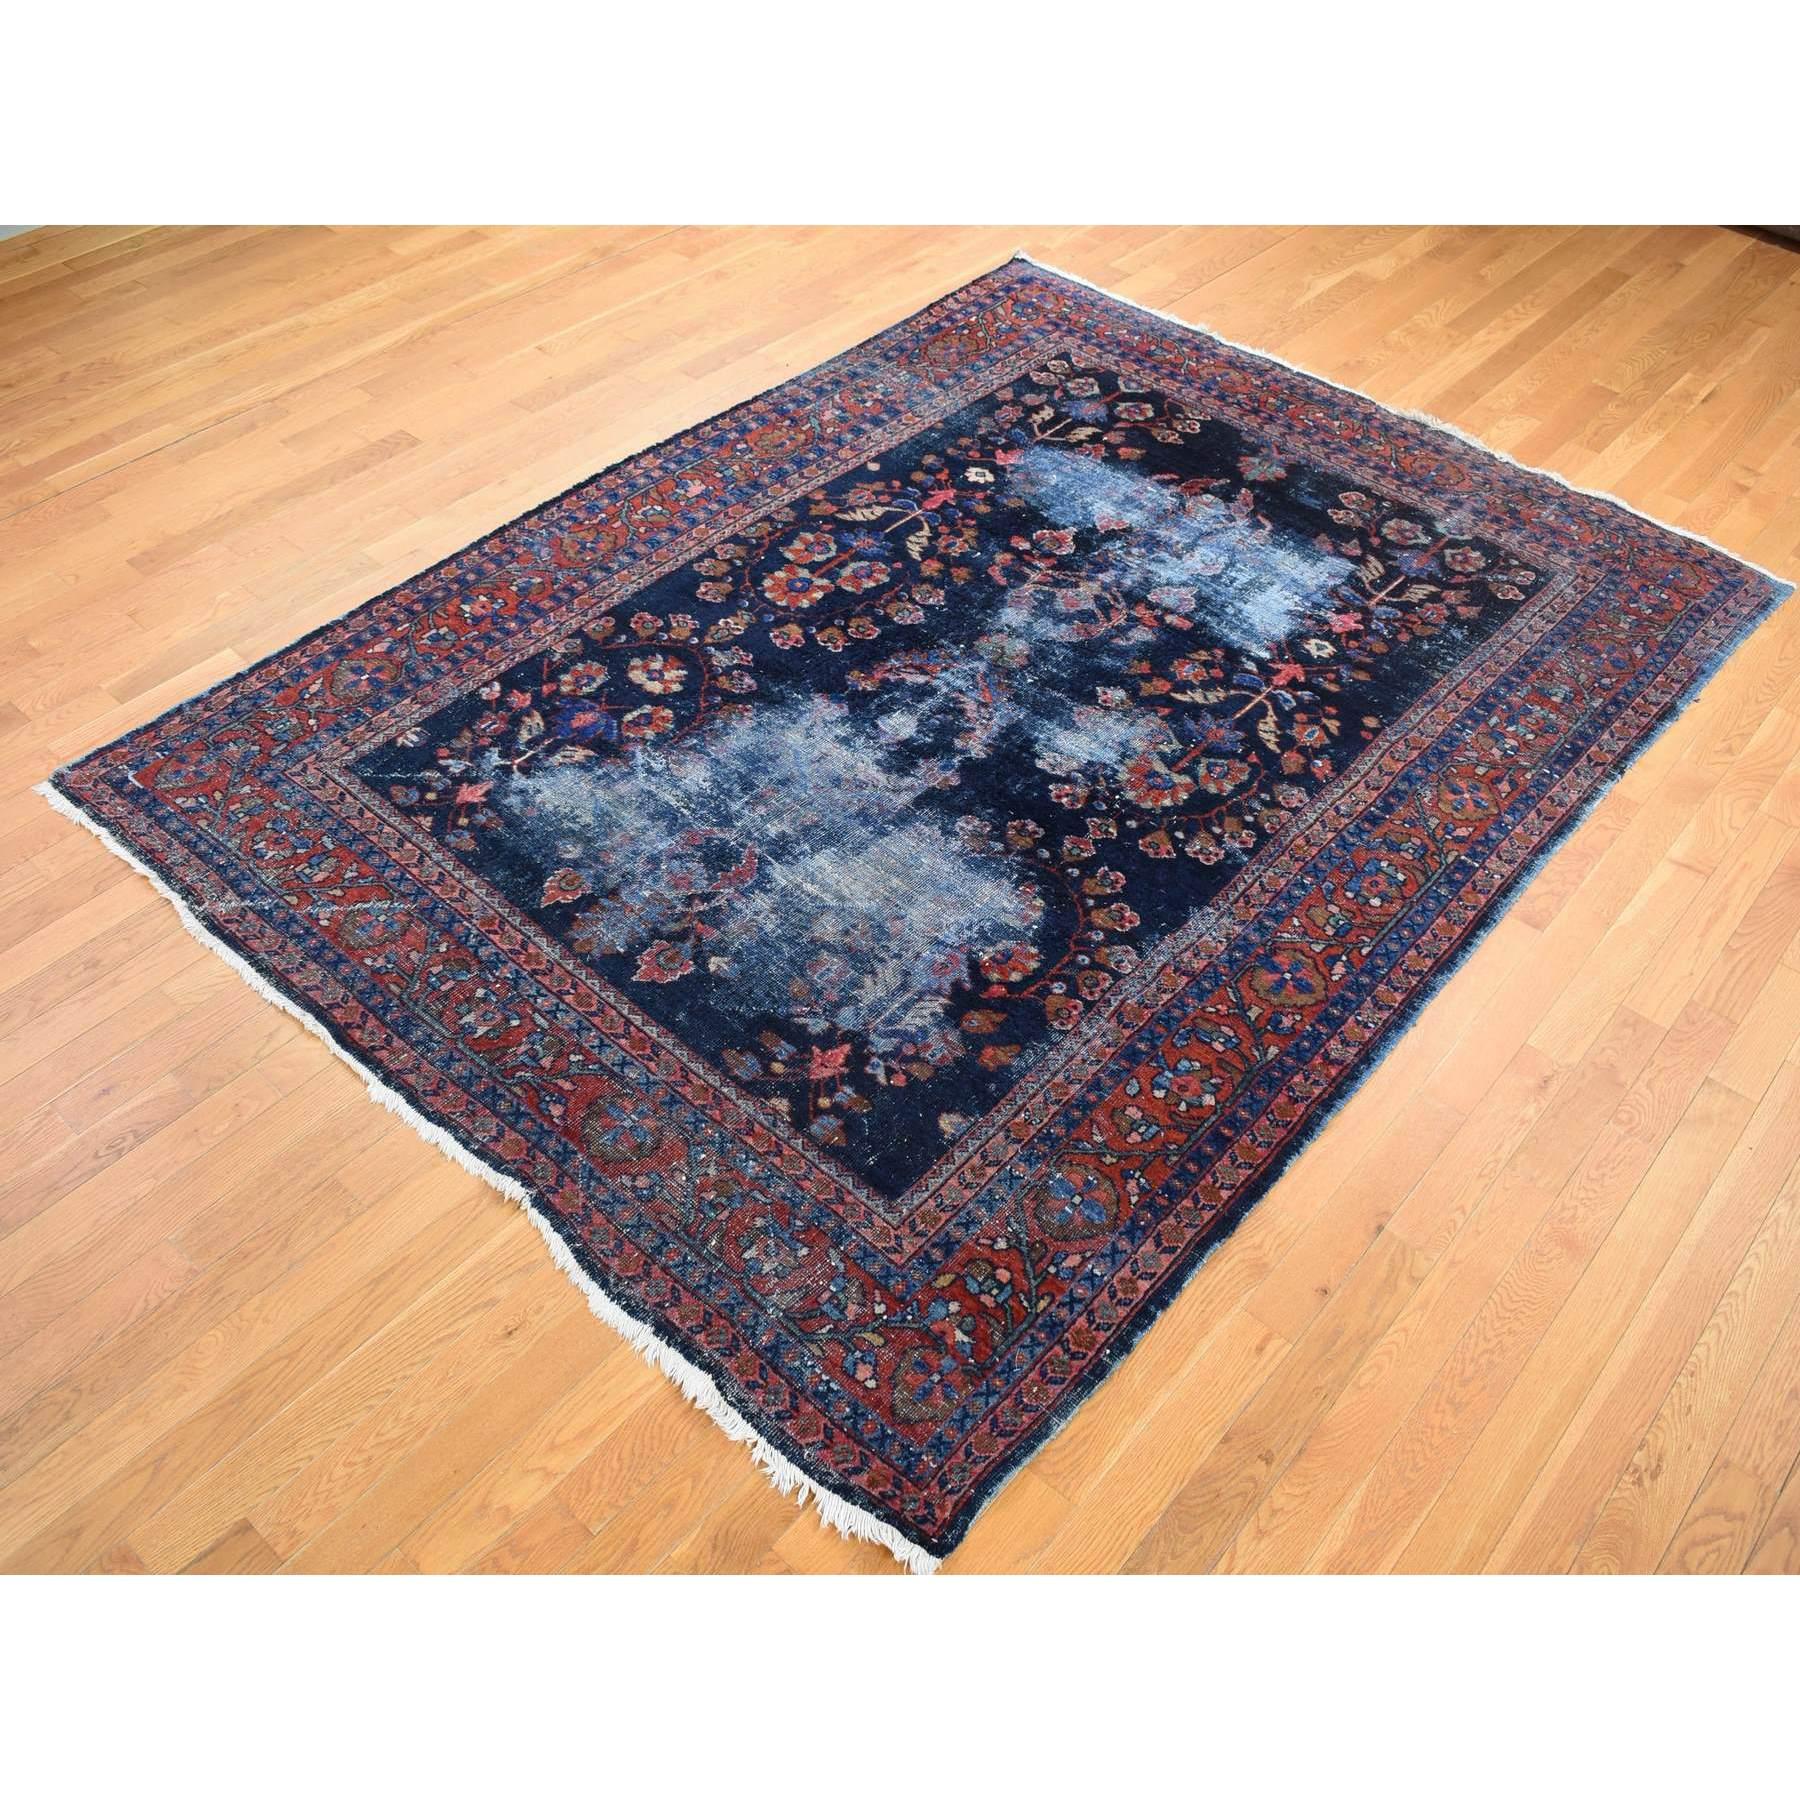 Medieval Midnight Blue Antique Persian Mahal Extensive Wear Pure Wool Hand Knotted Rug For Sale